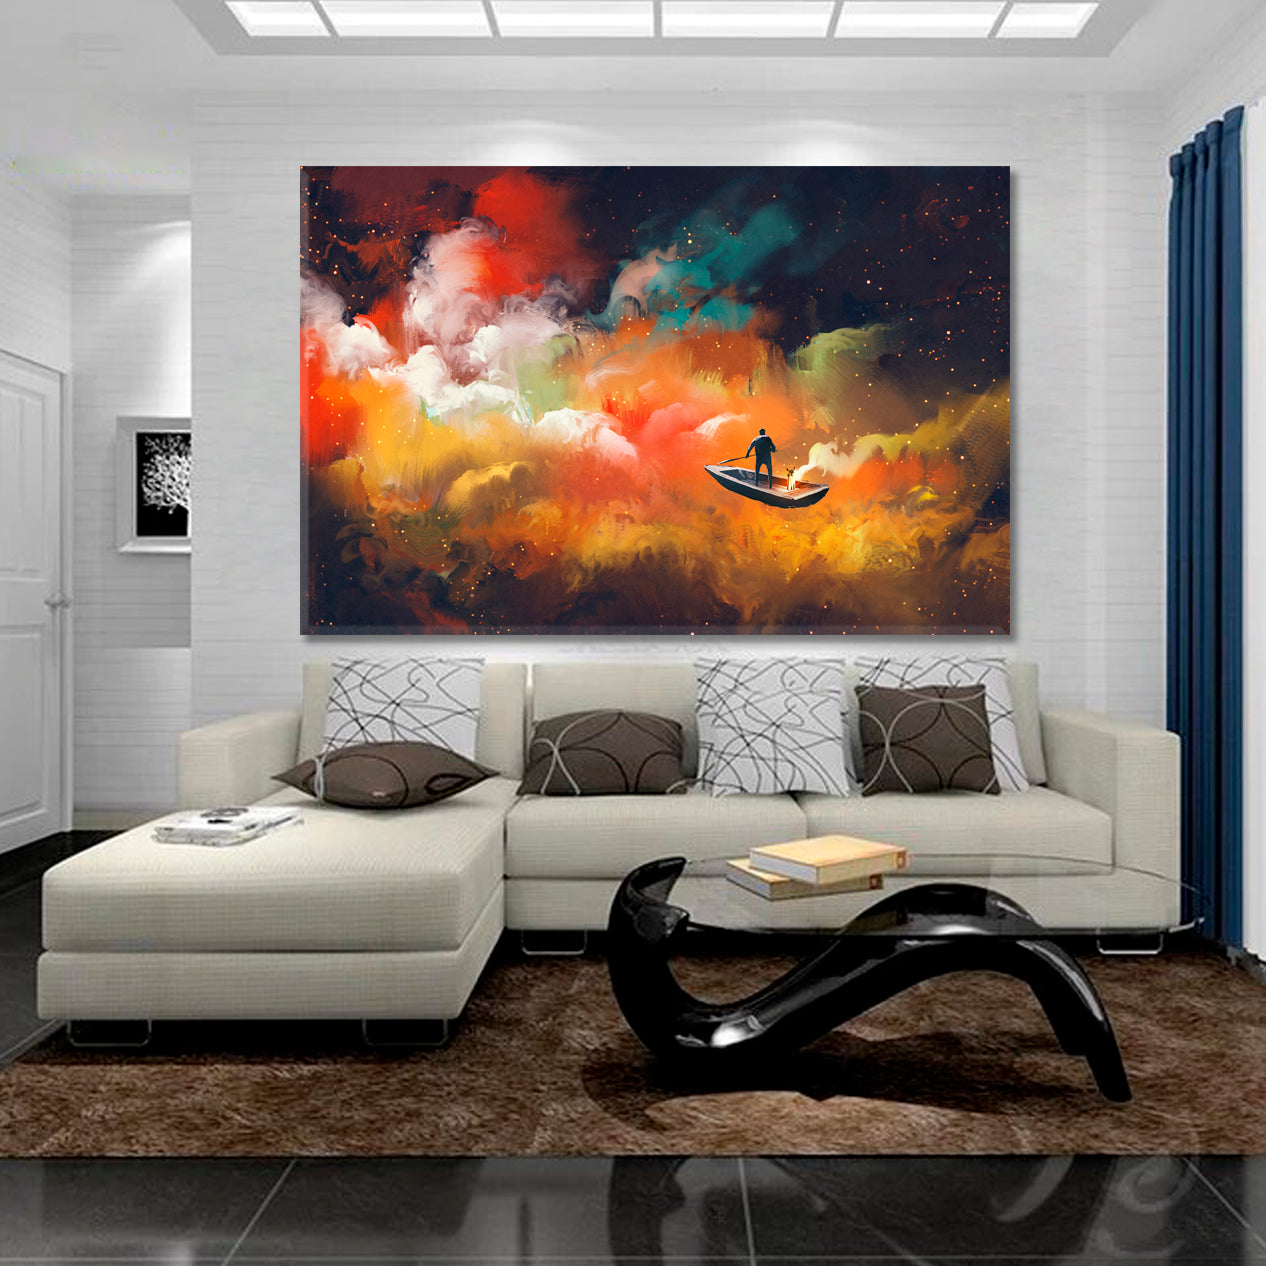 Surreal Dreamlike Man on Boat Outer Space Colorful Clouds Surreal Fantasy Large Art Print Décor Artesty   